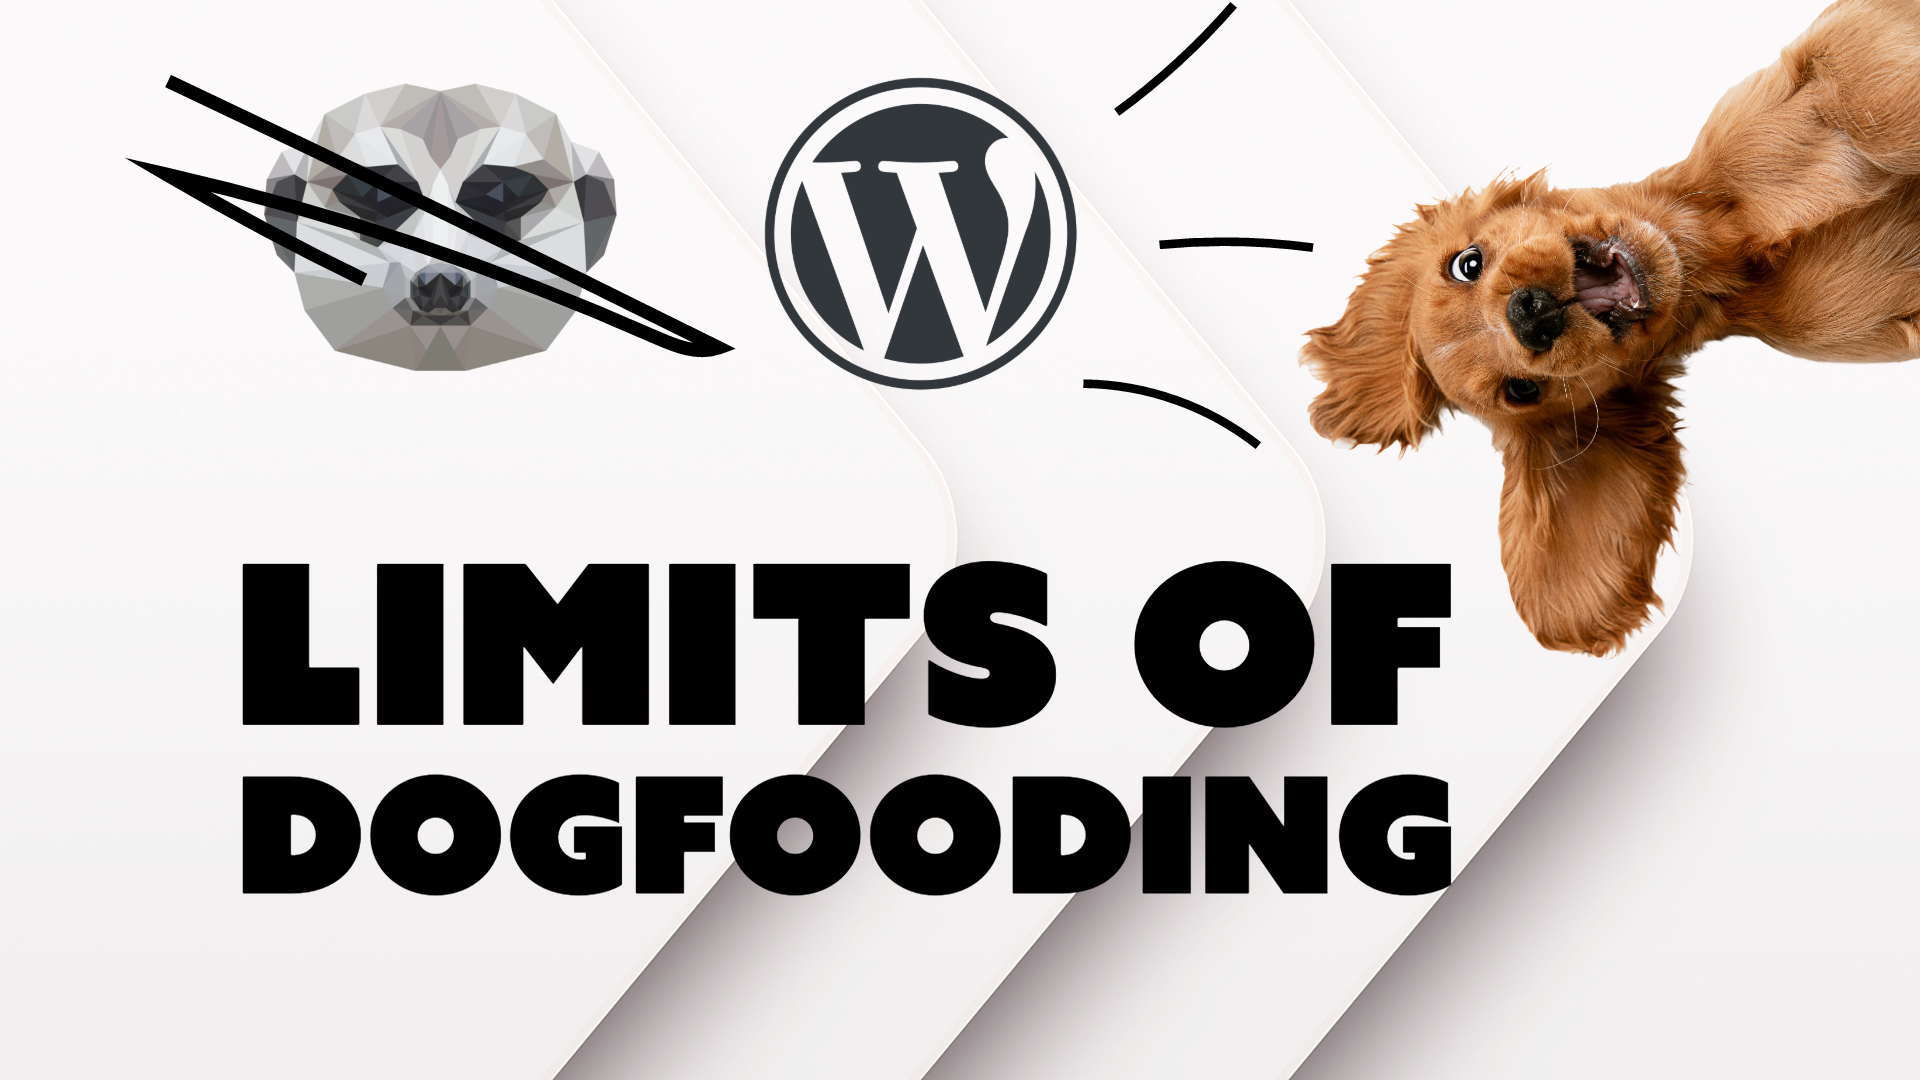 Collage. Arrows pointing to the right in the background. Text: Limits of dogfooding. Meerkats CMS logo crossed out. WordPress logo appearing with a flash. Happy dog.